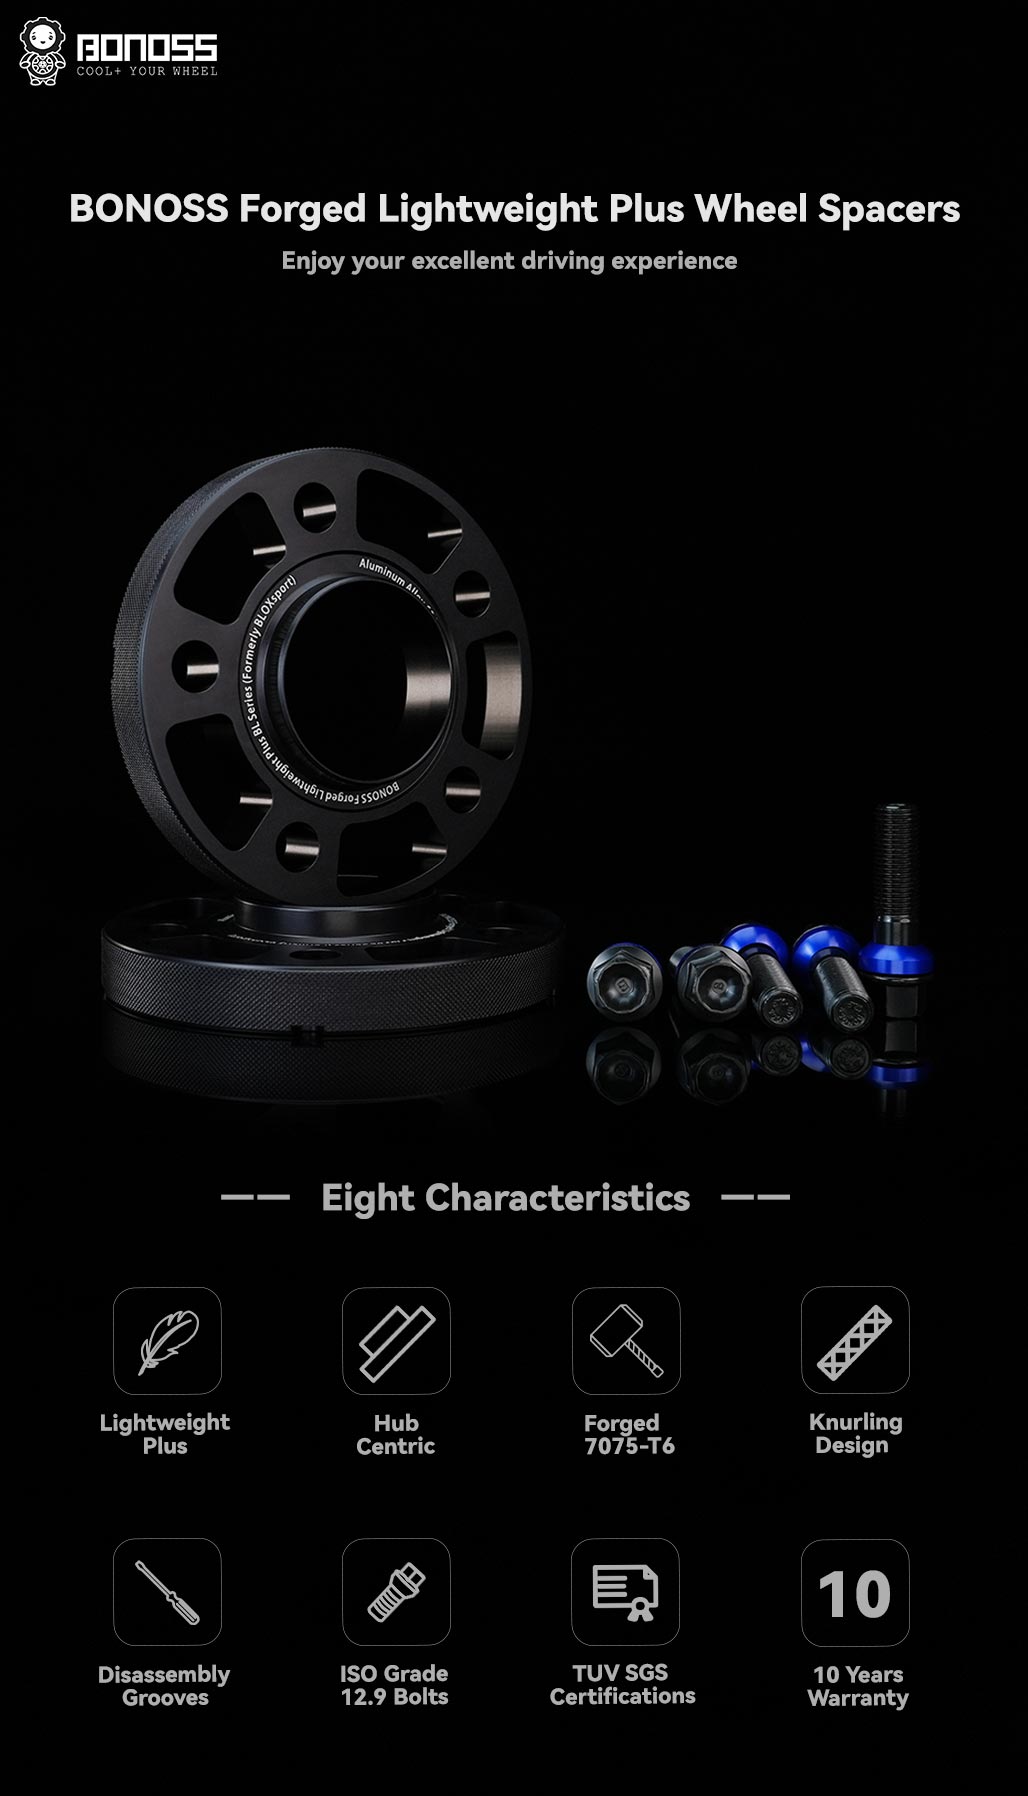 BONOSS Forged Lightweight Plus Hubcentric Wheel Spacers 5 Lug Wheel Adapters AL7075-T6 Car Wheel ET Spacers (1)